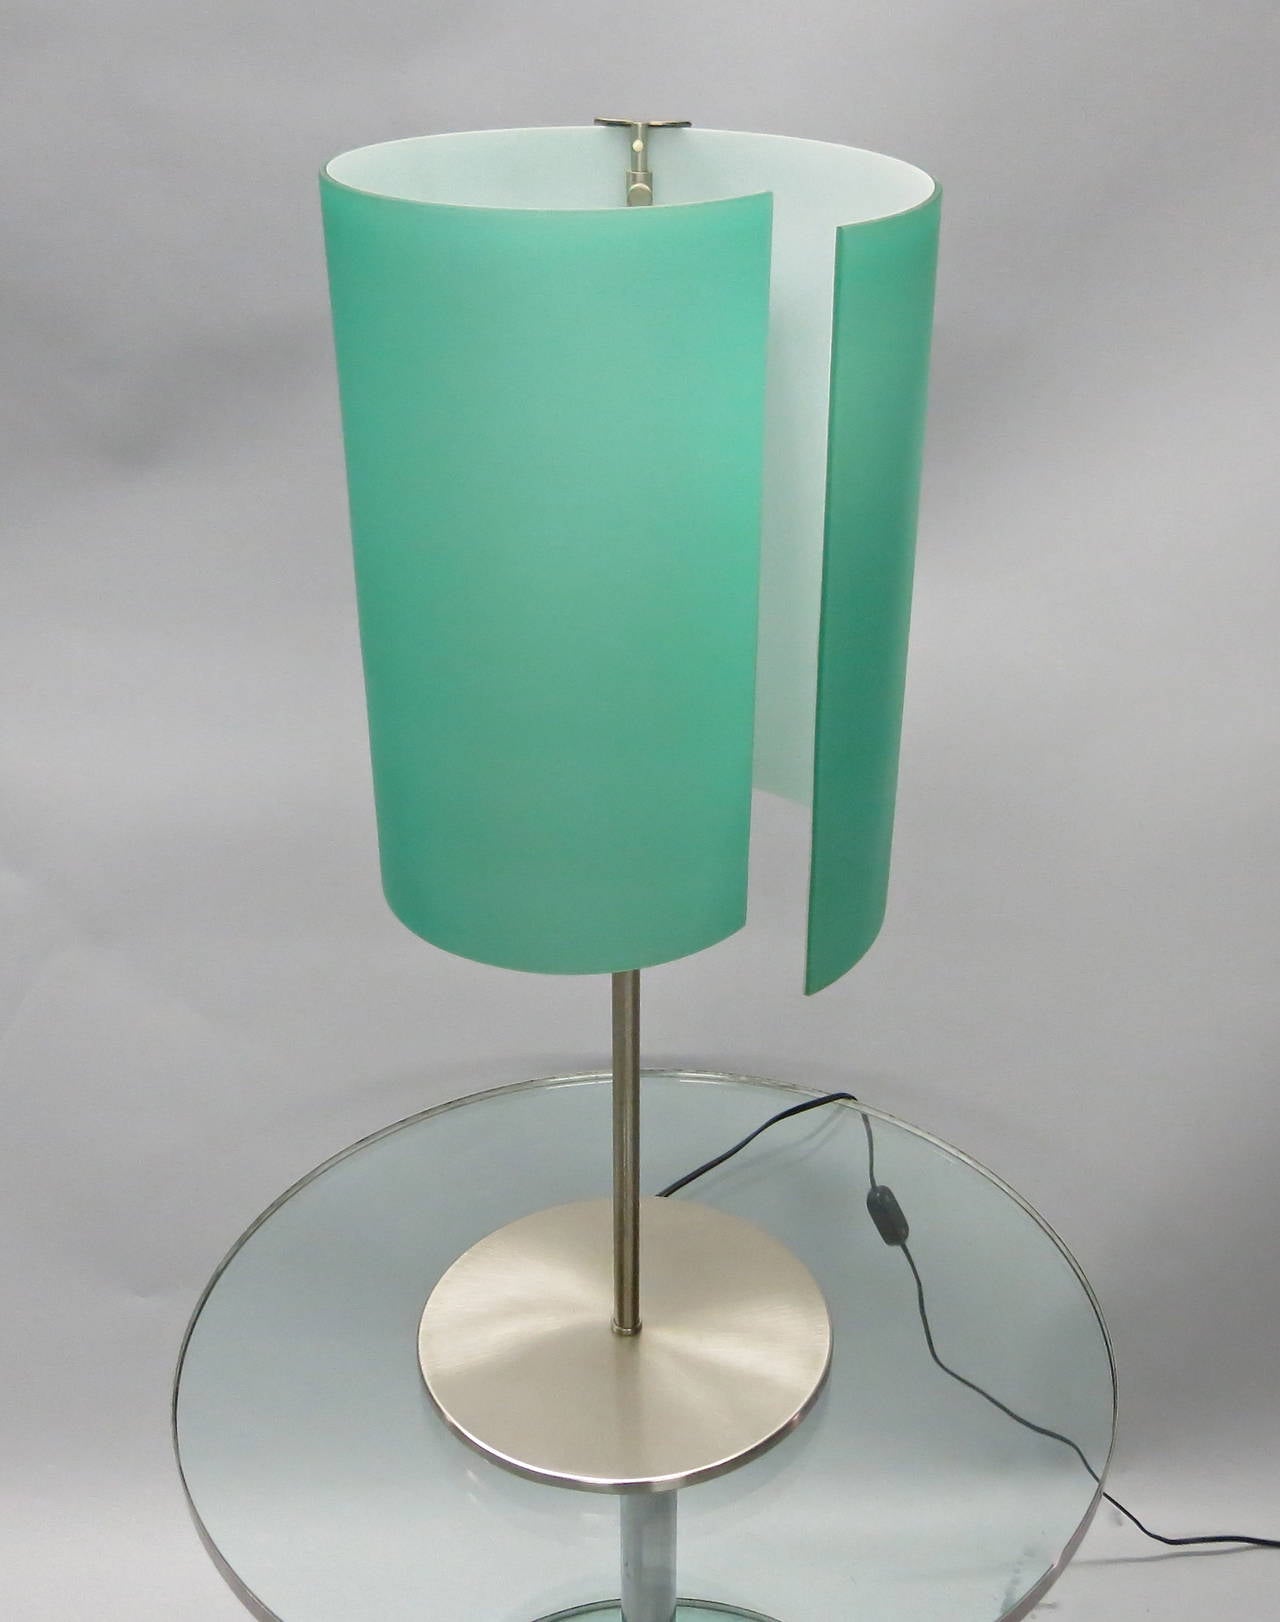 Table lamp in curved, hand made, satin aqua-colored cased glass and brushed nickel; labeled "Leucos Fatto A Mano Made in Italy." In excellent condition- no scratches or chips. This color shade is no longer offered by Leucos.